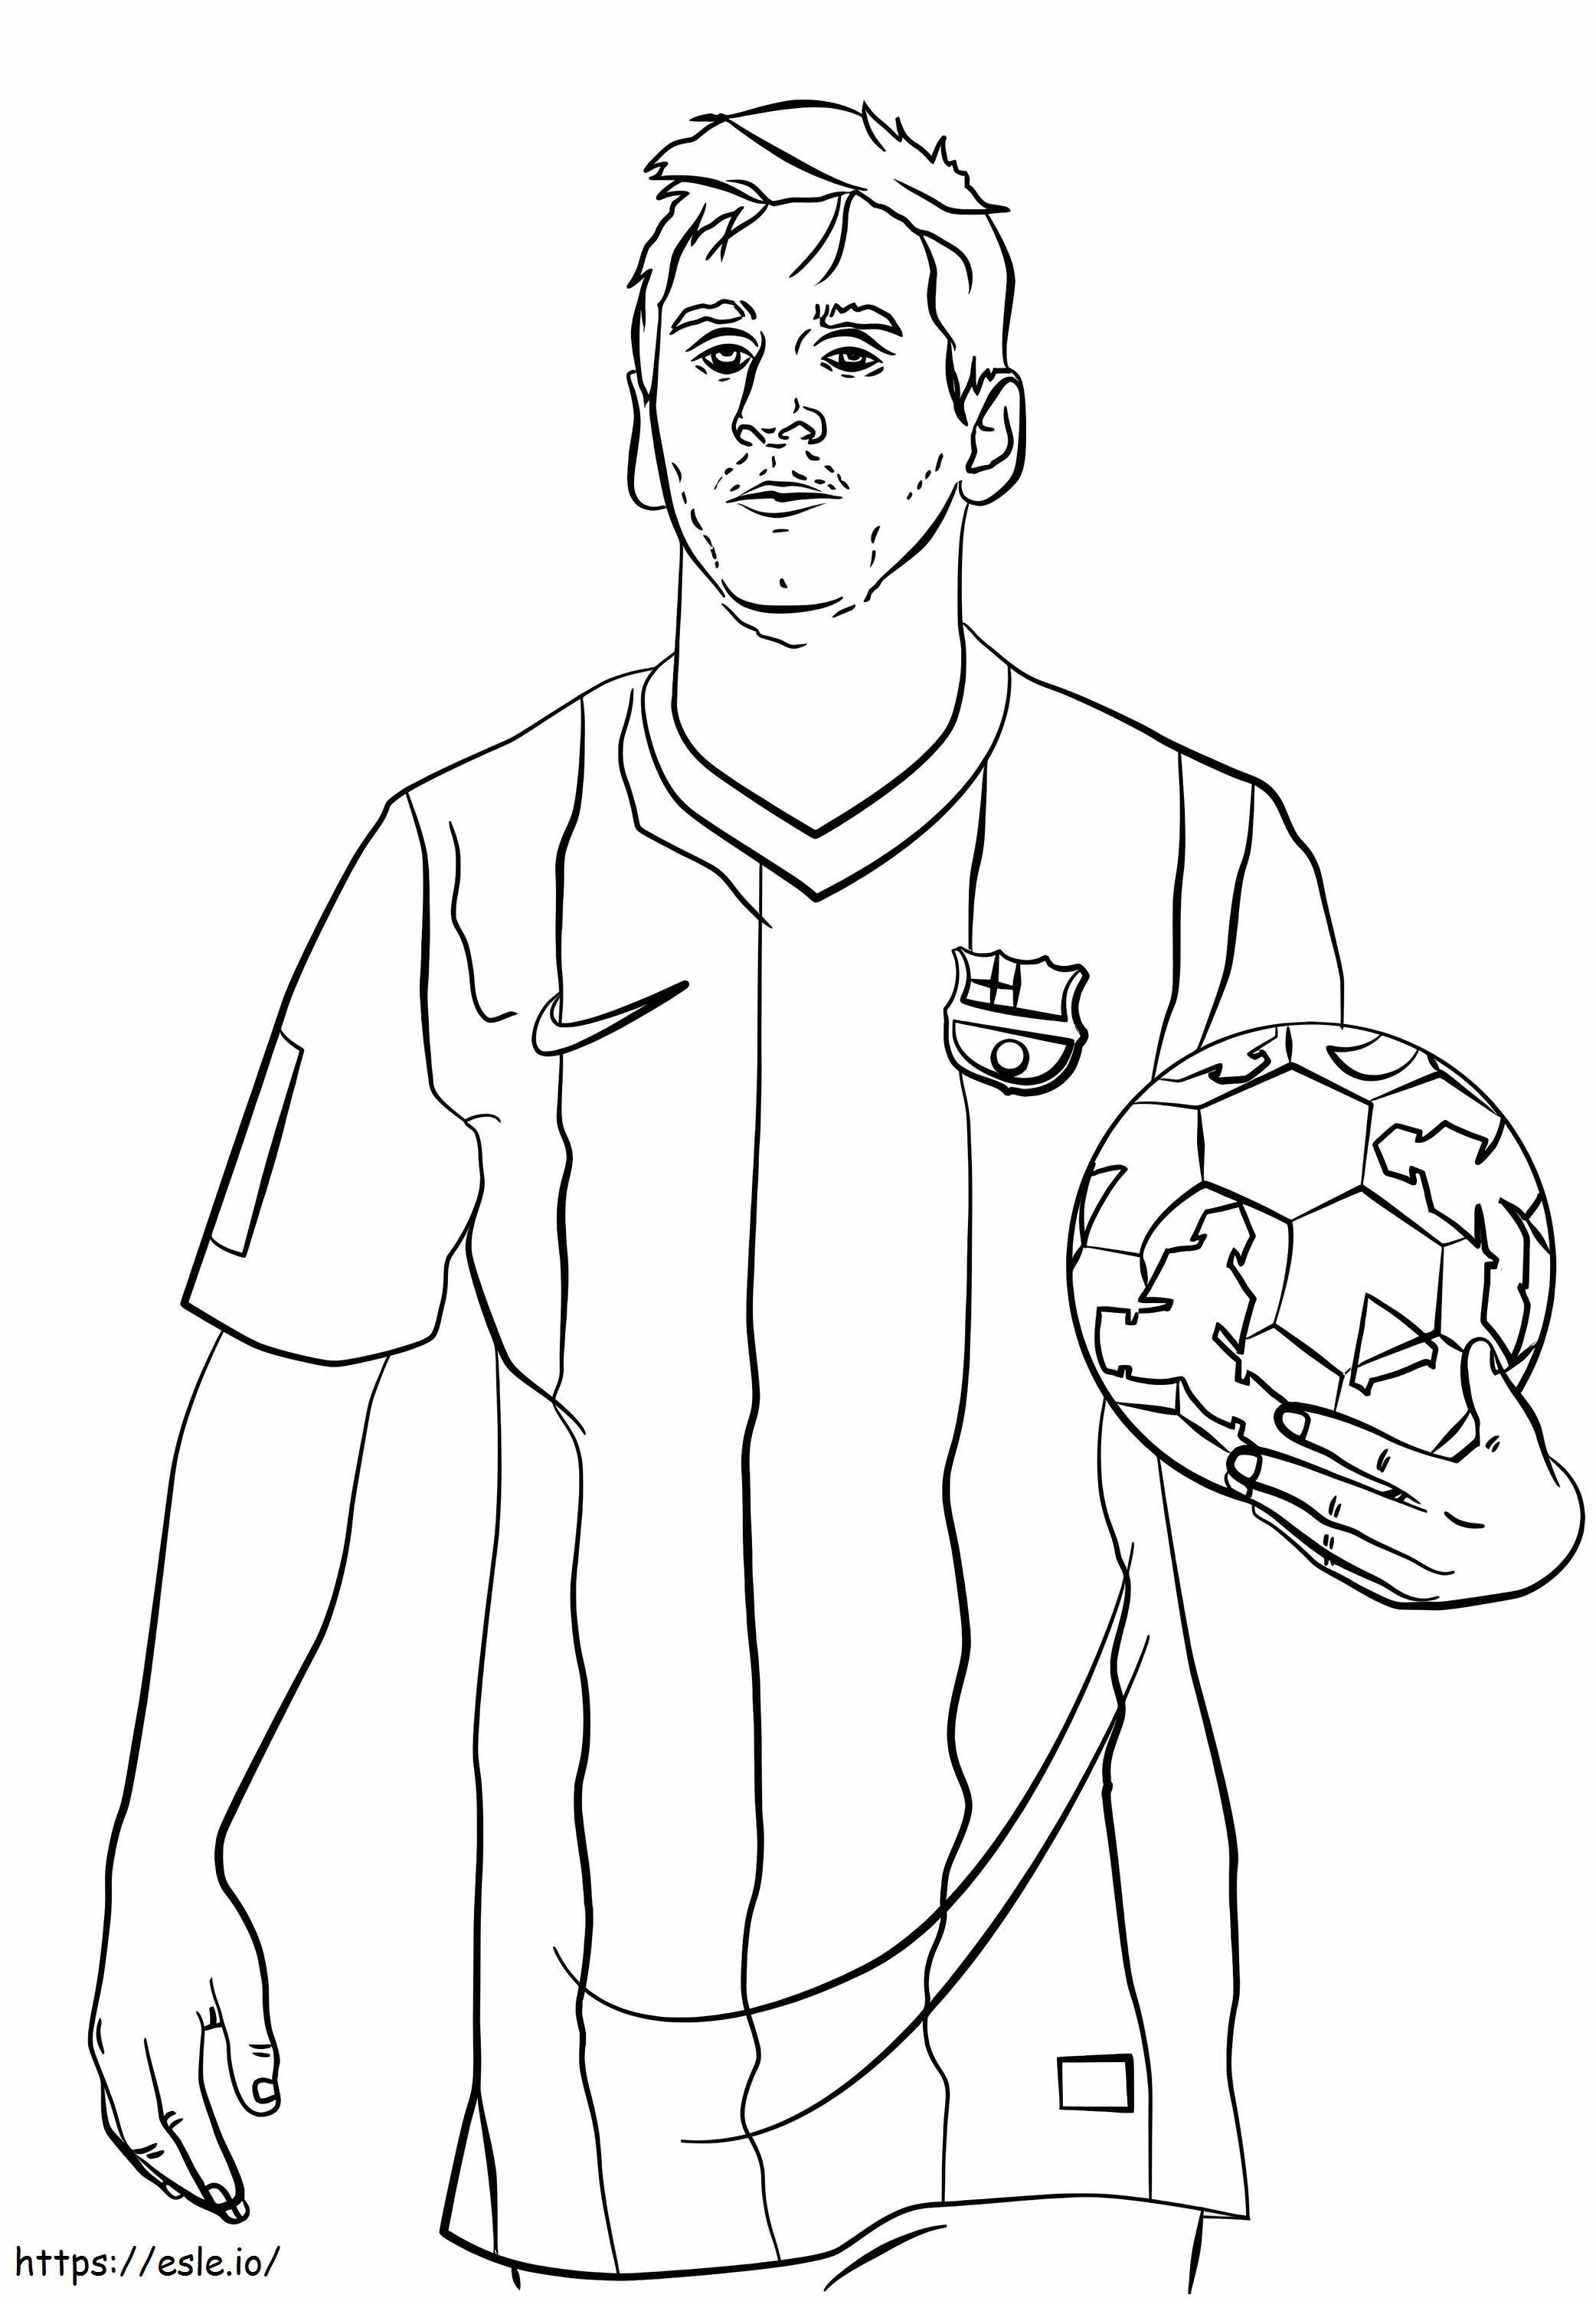 Lionel Messi Holding The Ball coloring page